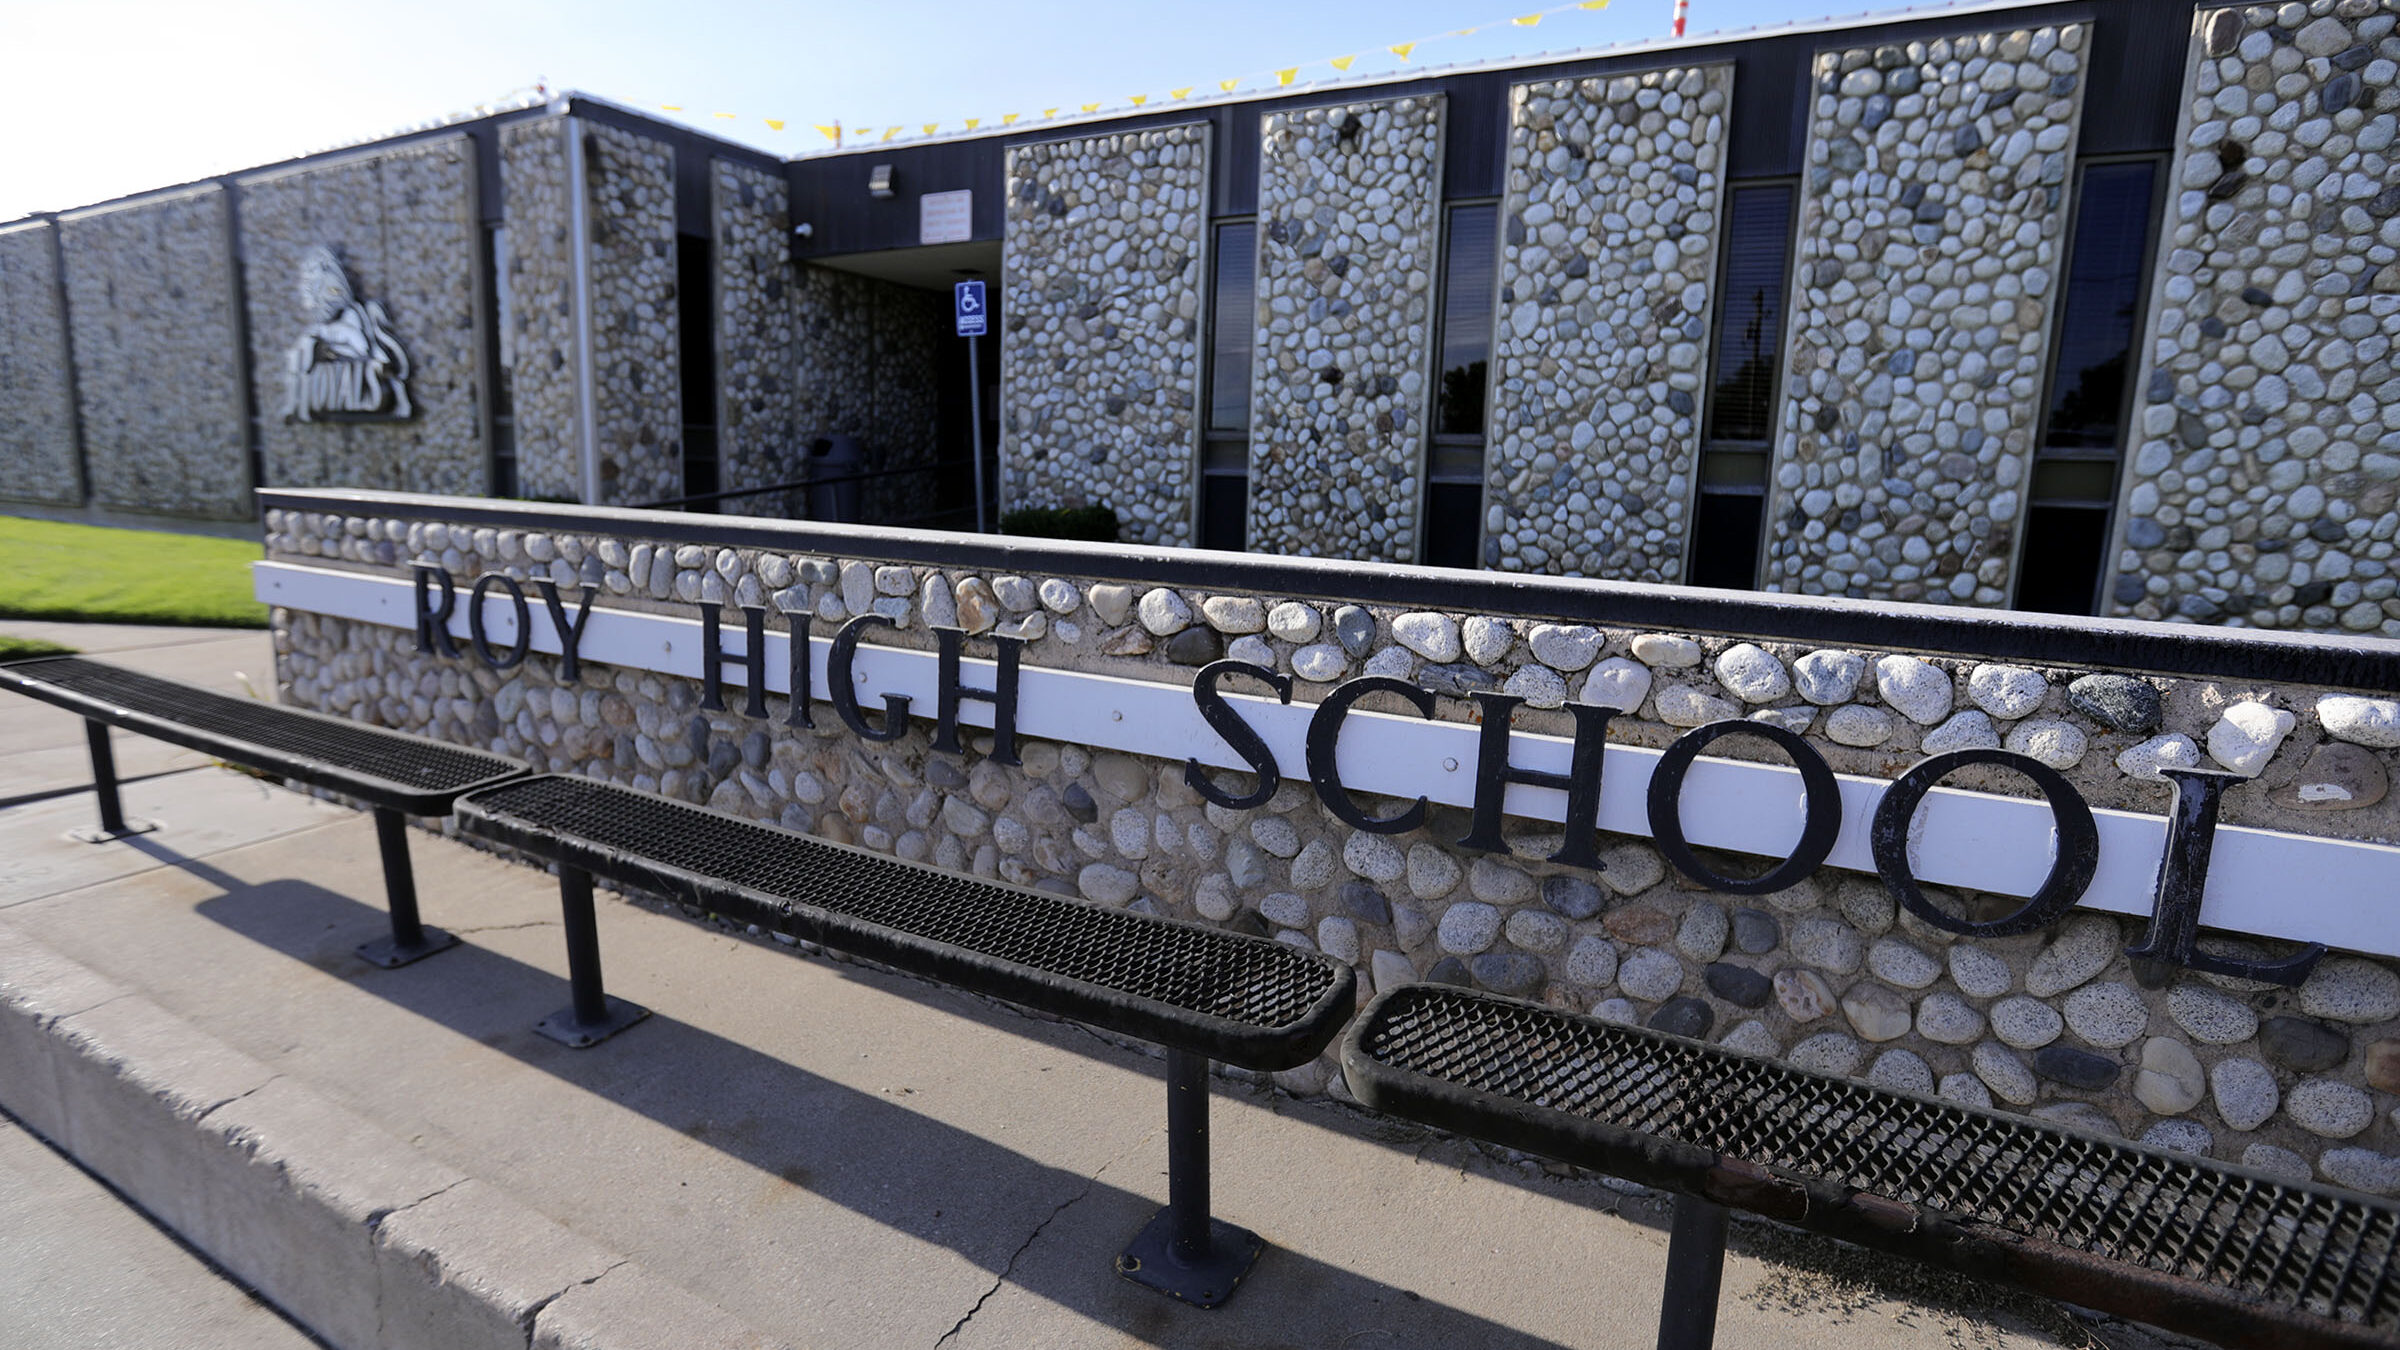 Roy High School sign pictured, a student allegedly brought a gun to campus...